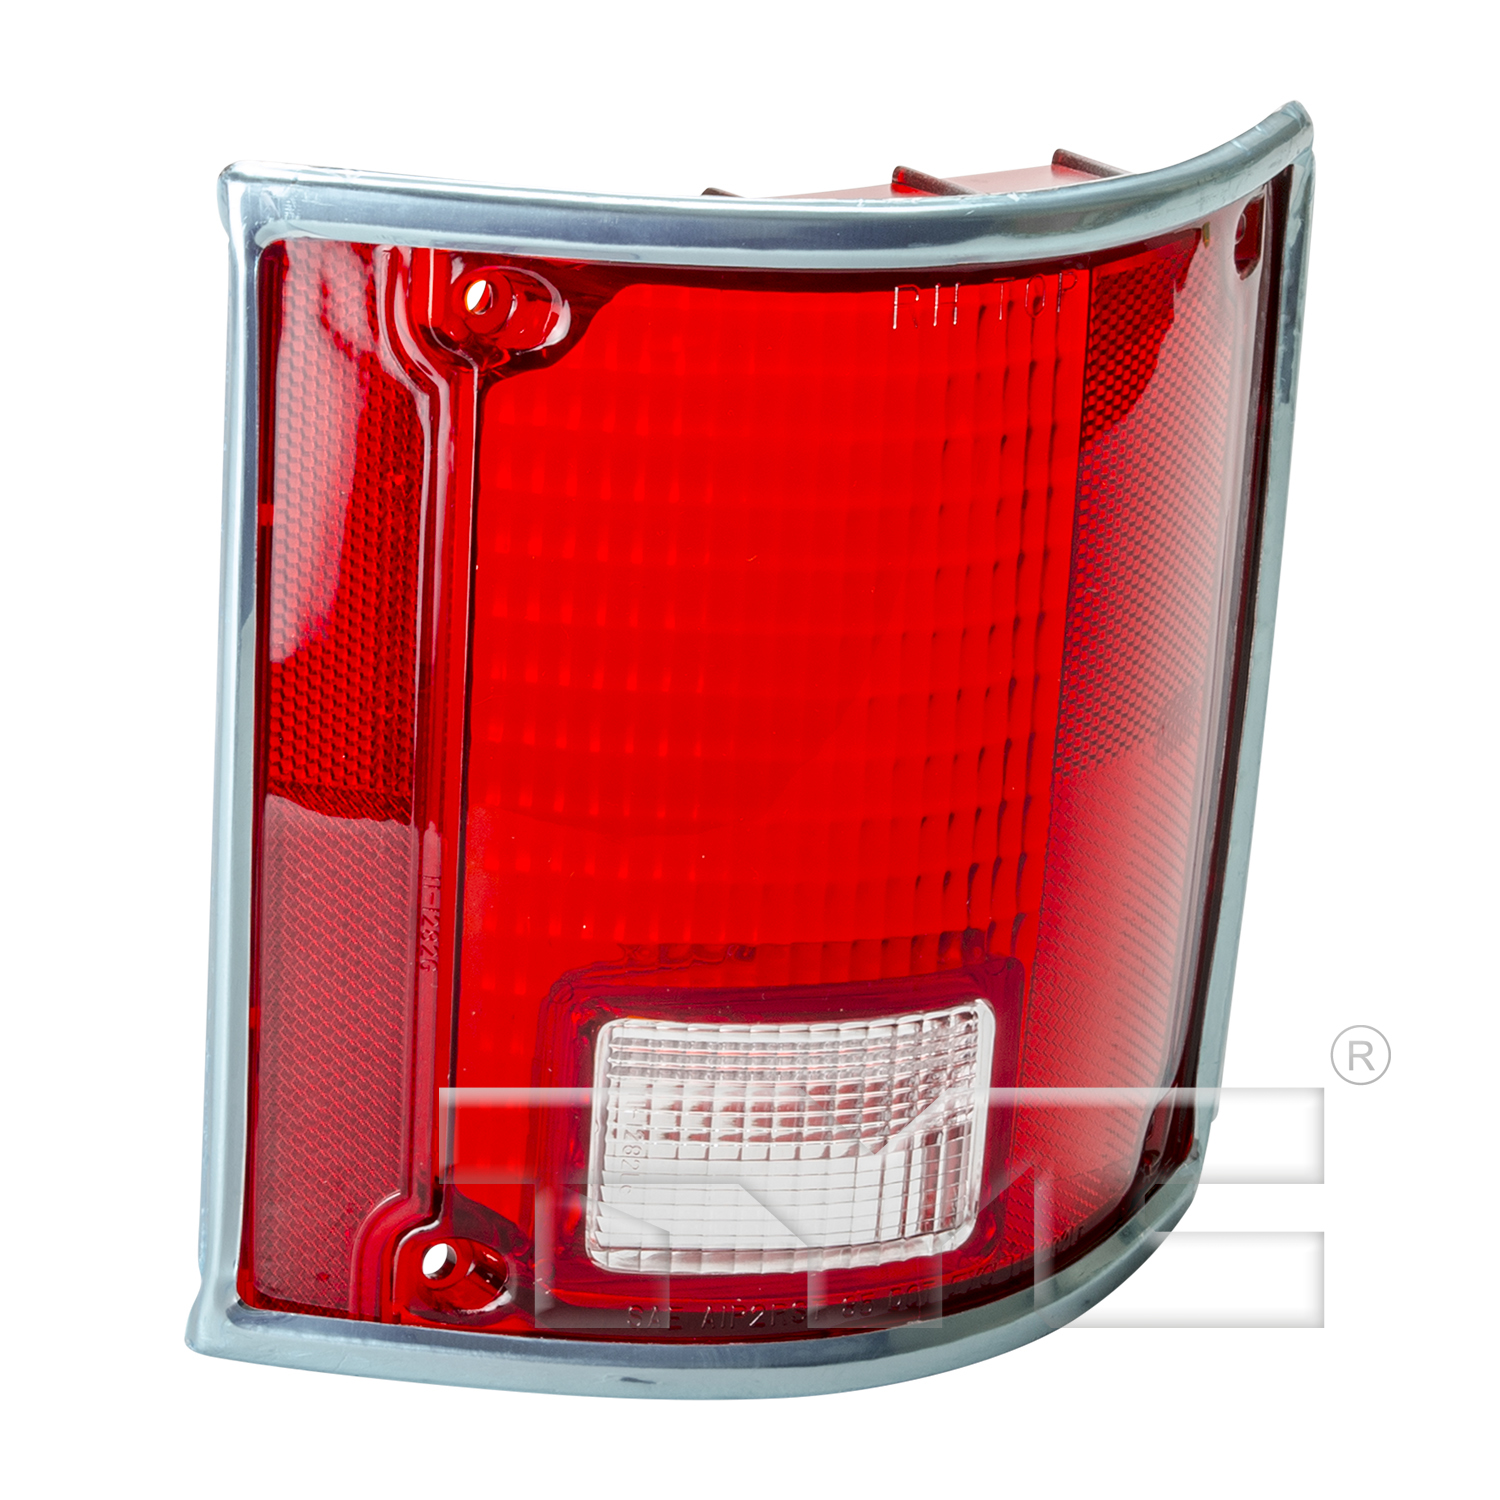 Aftermarket TAILLIGHTS for GMC - R1500 SUBURBAN, R1500 SUBURBAN,87-91,RT Taillamp lens